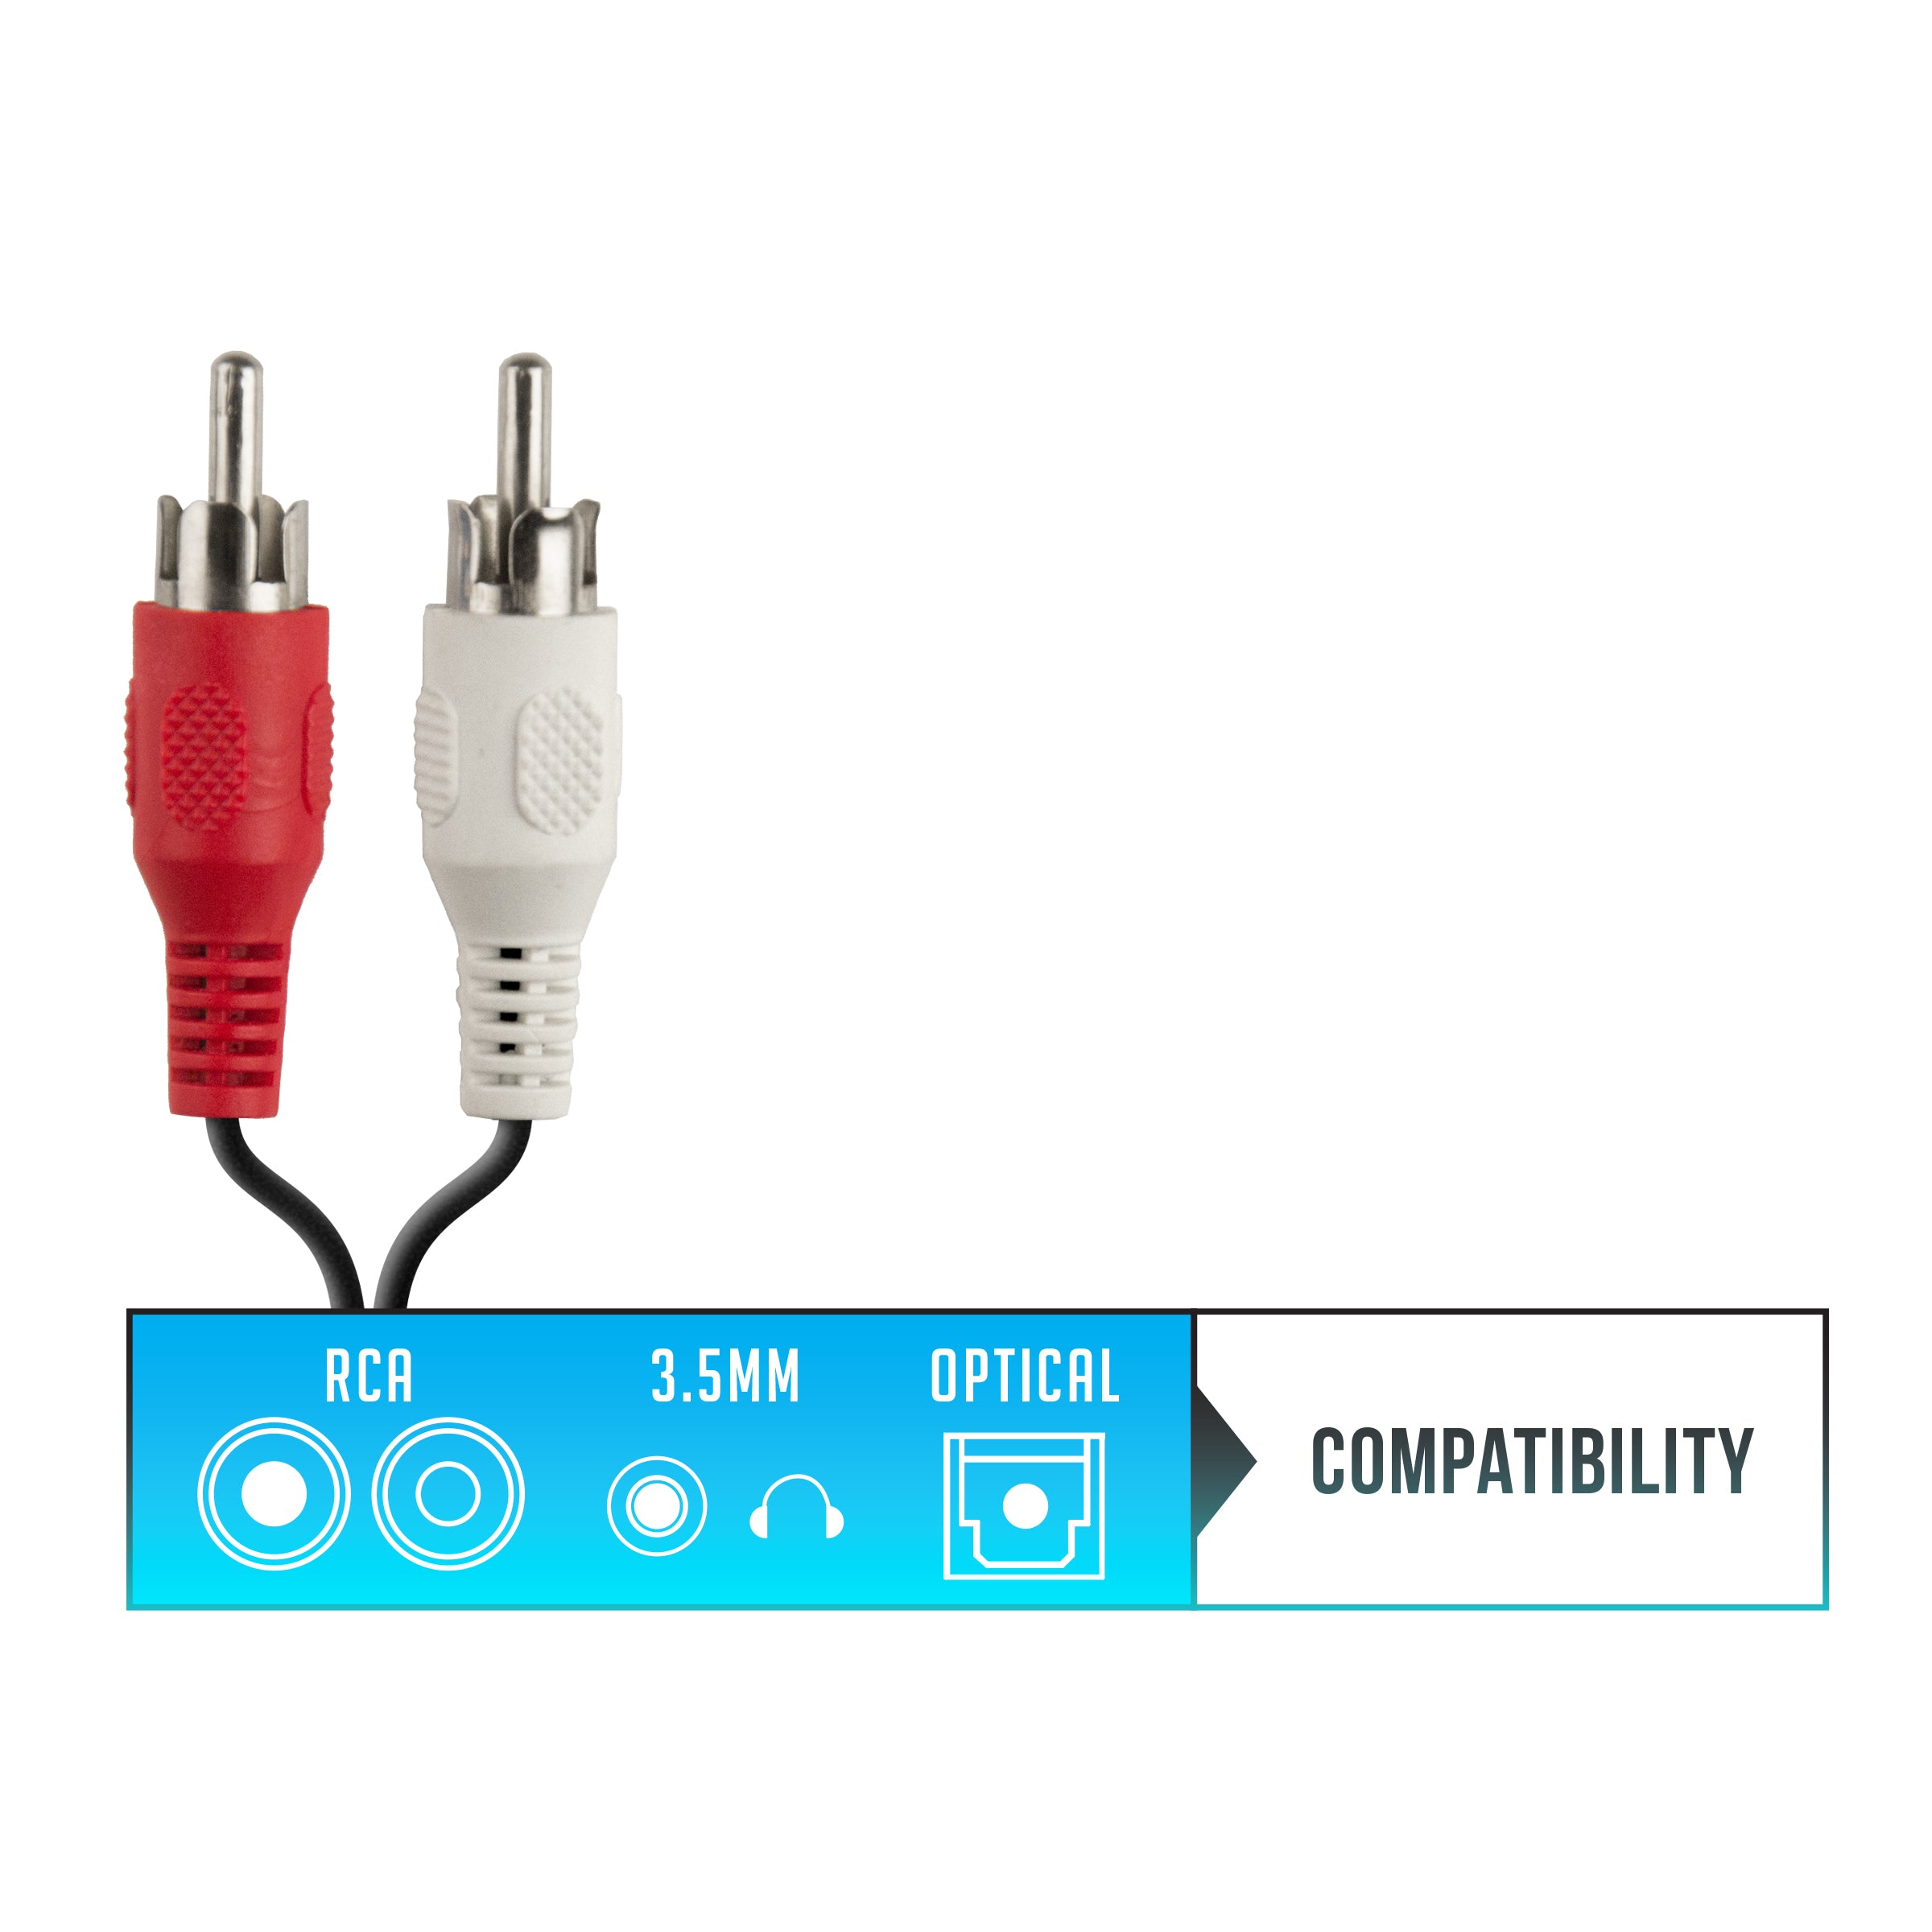 Red and white rca audio cables against a white background with icons indicating compatibility with 3.5mm and optical connections.